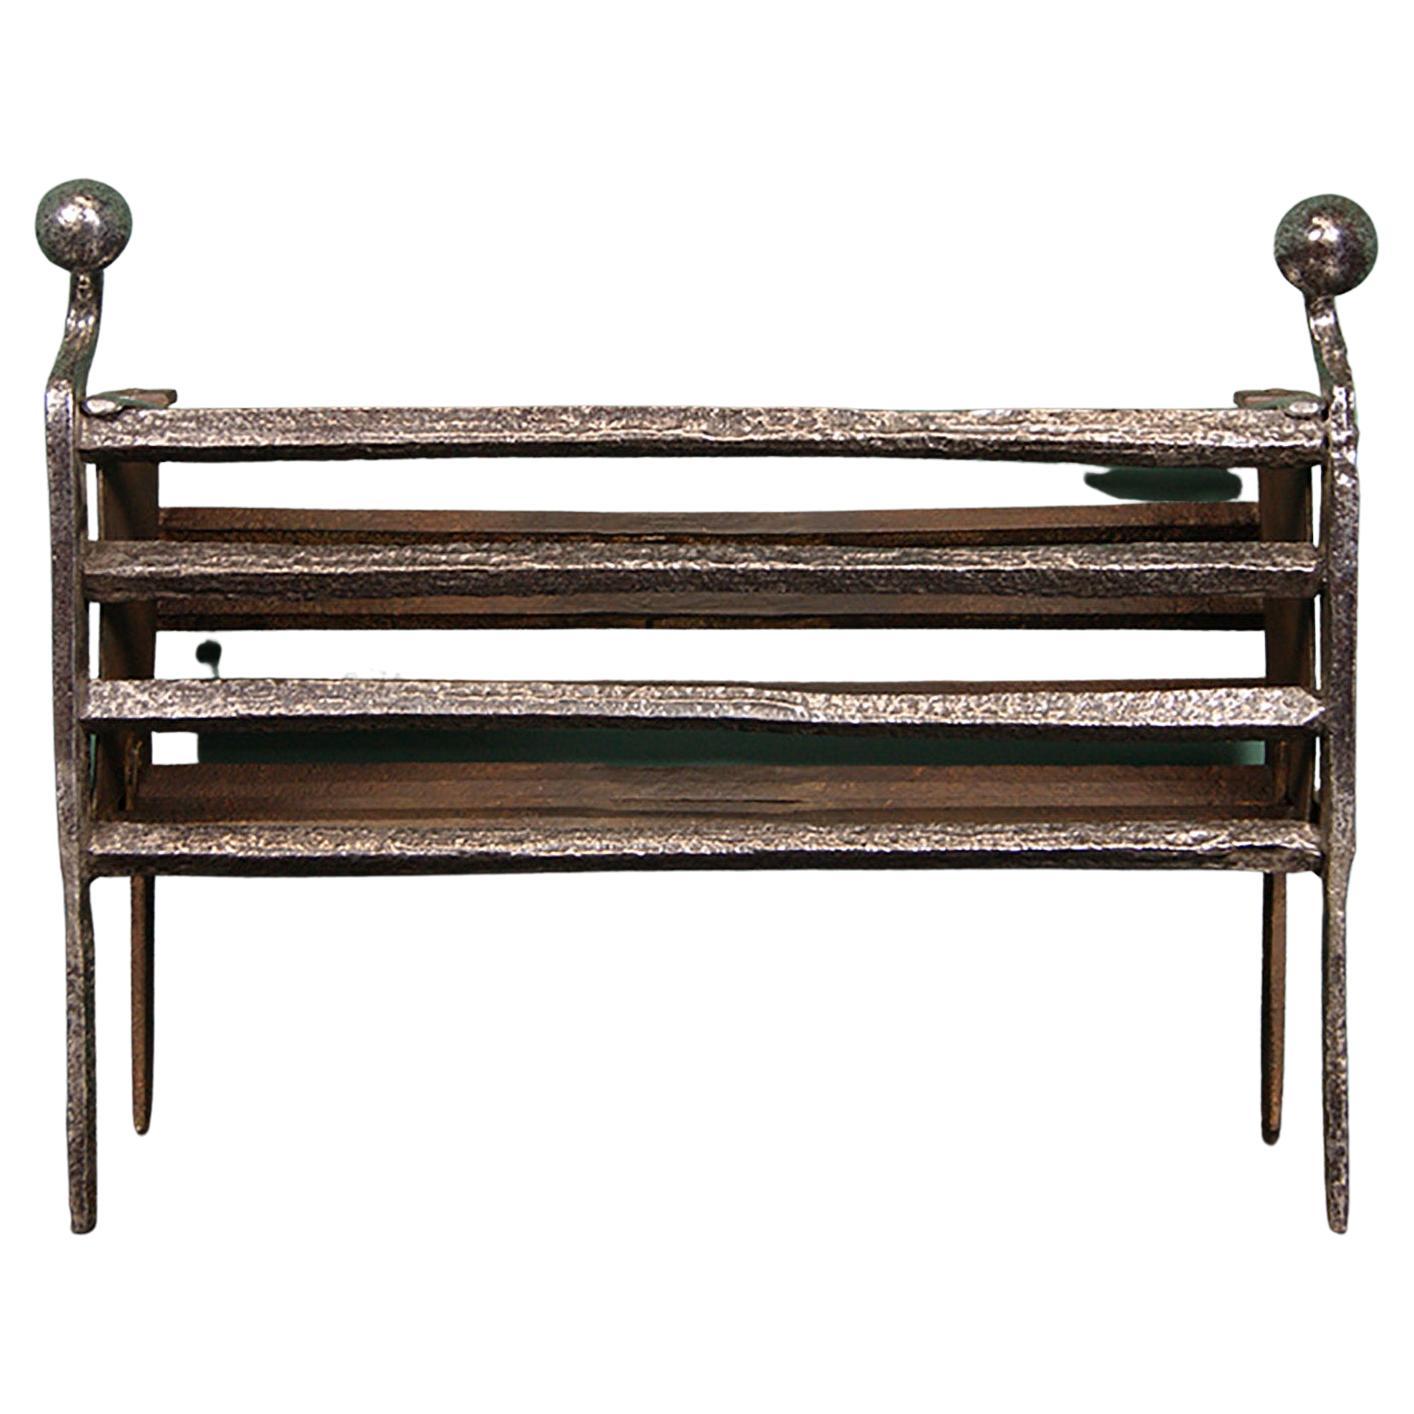 An 18th Century Wrought-Iron Log Fire Basket For Sale